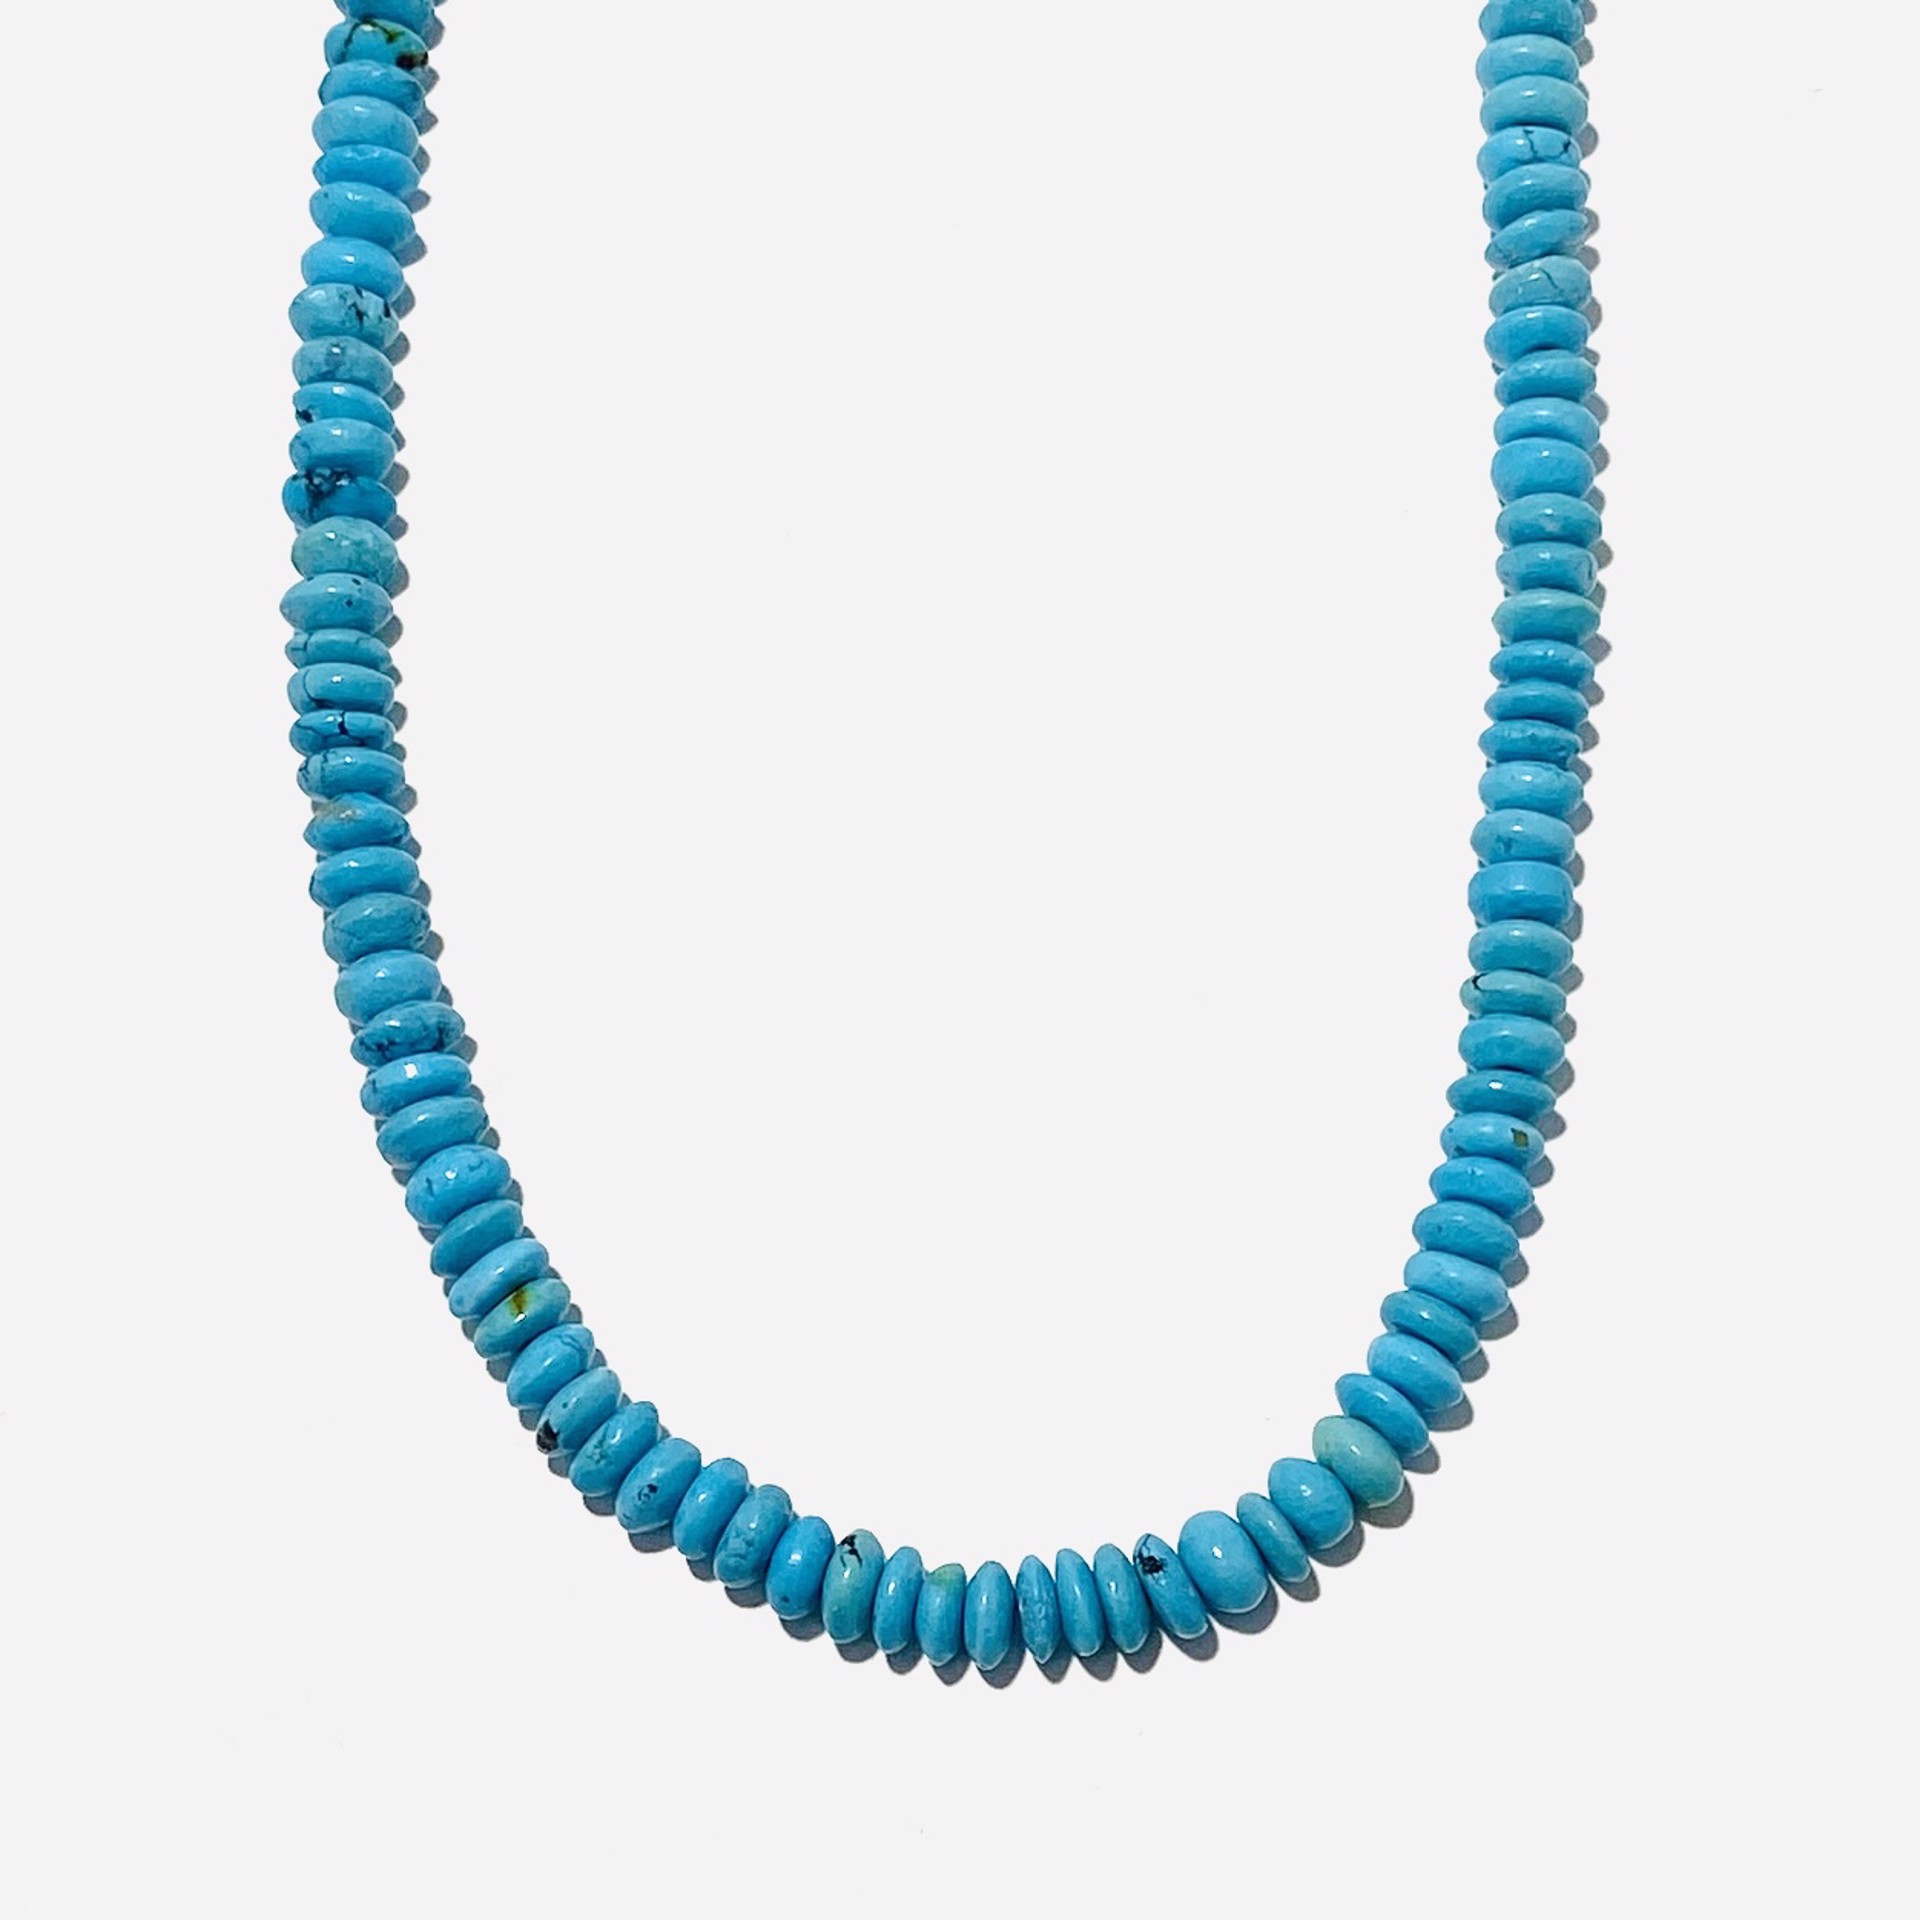 Turquoise Disc Bead Strand Necklace by Nance Trueworthy